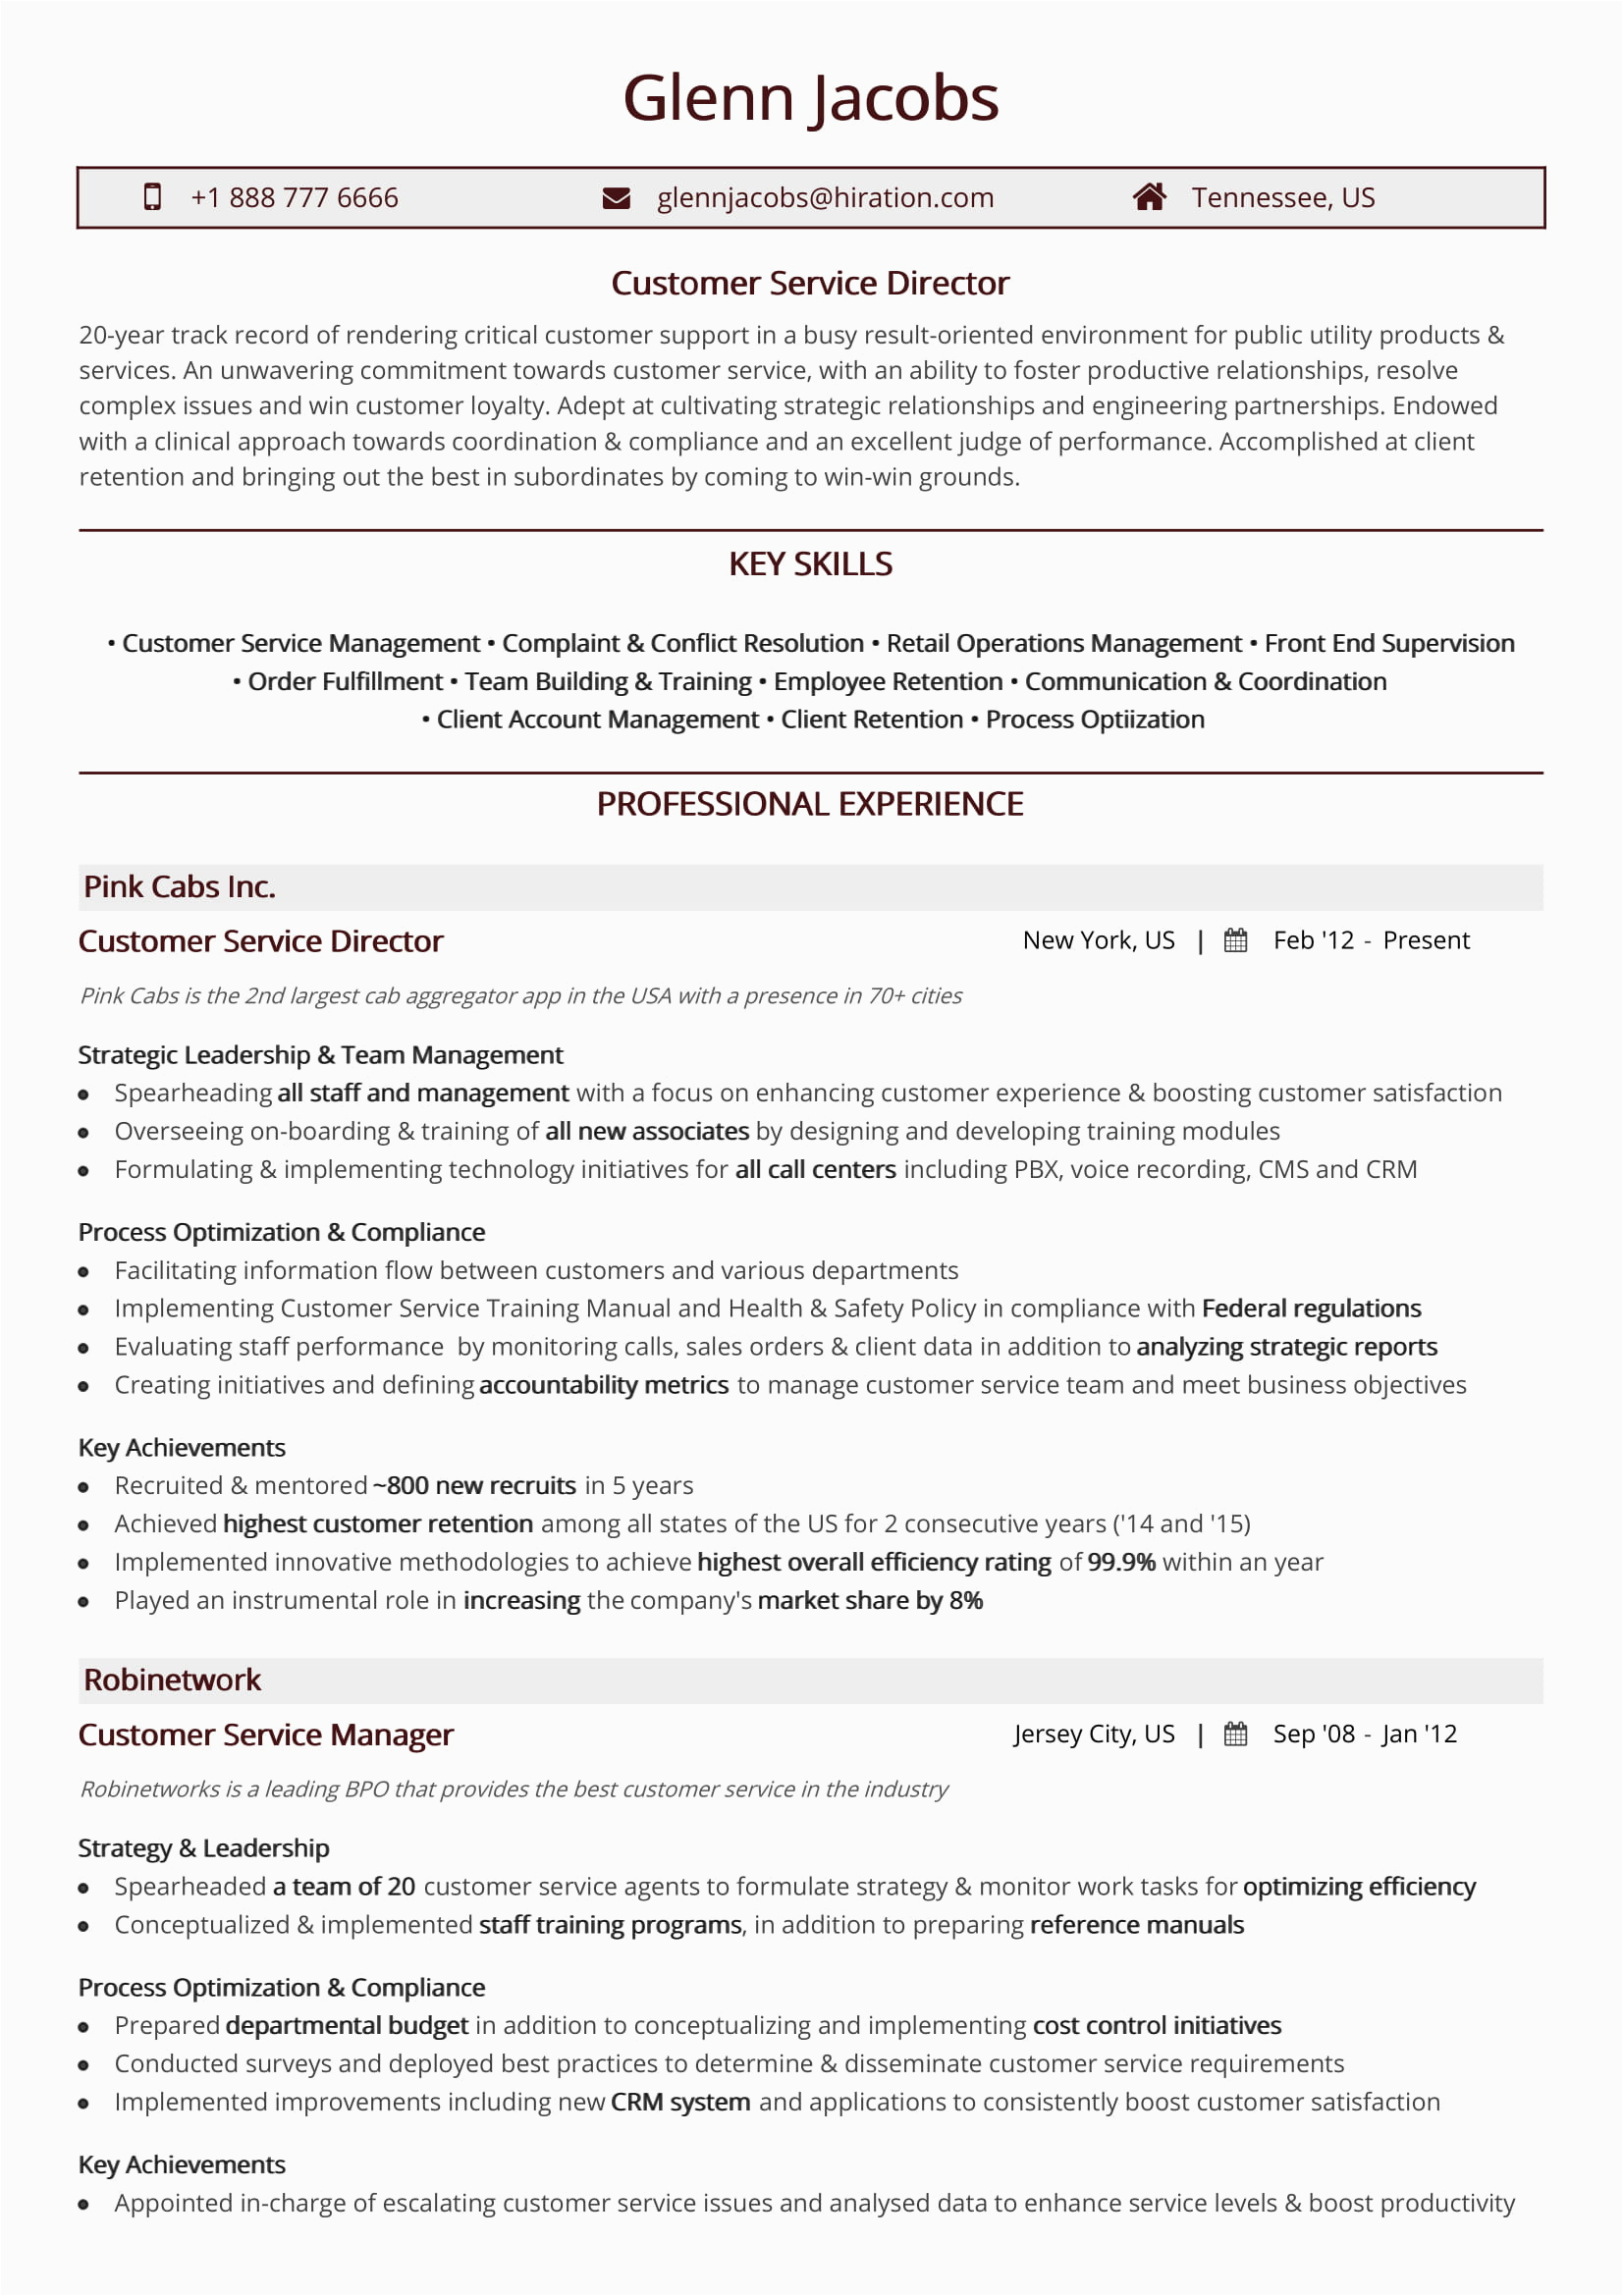 Customer Service Manager Resume Templates Samples Customer Service Resume Examples & Resume Samples [2020]